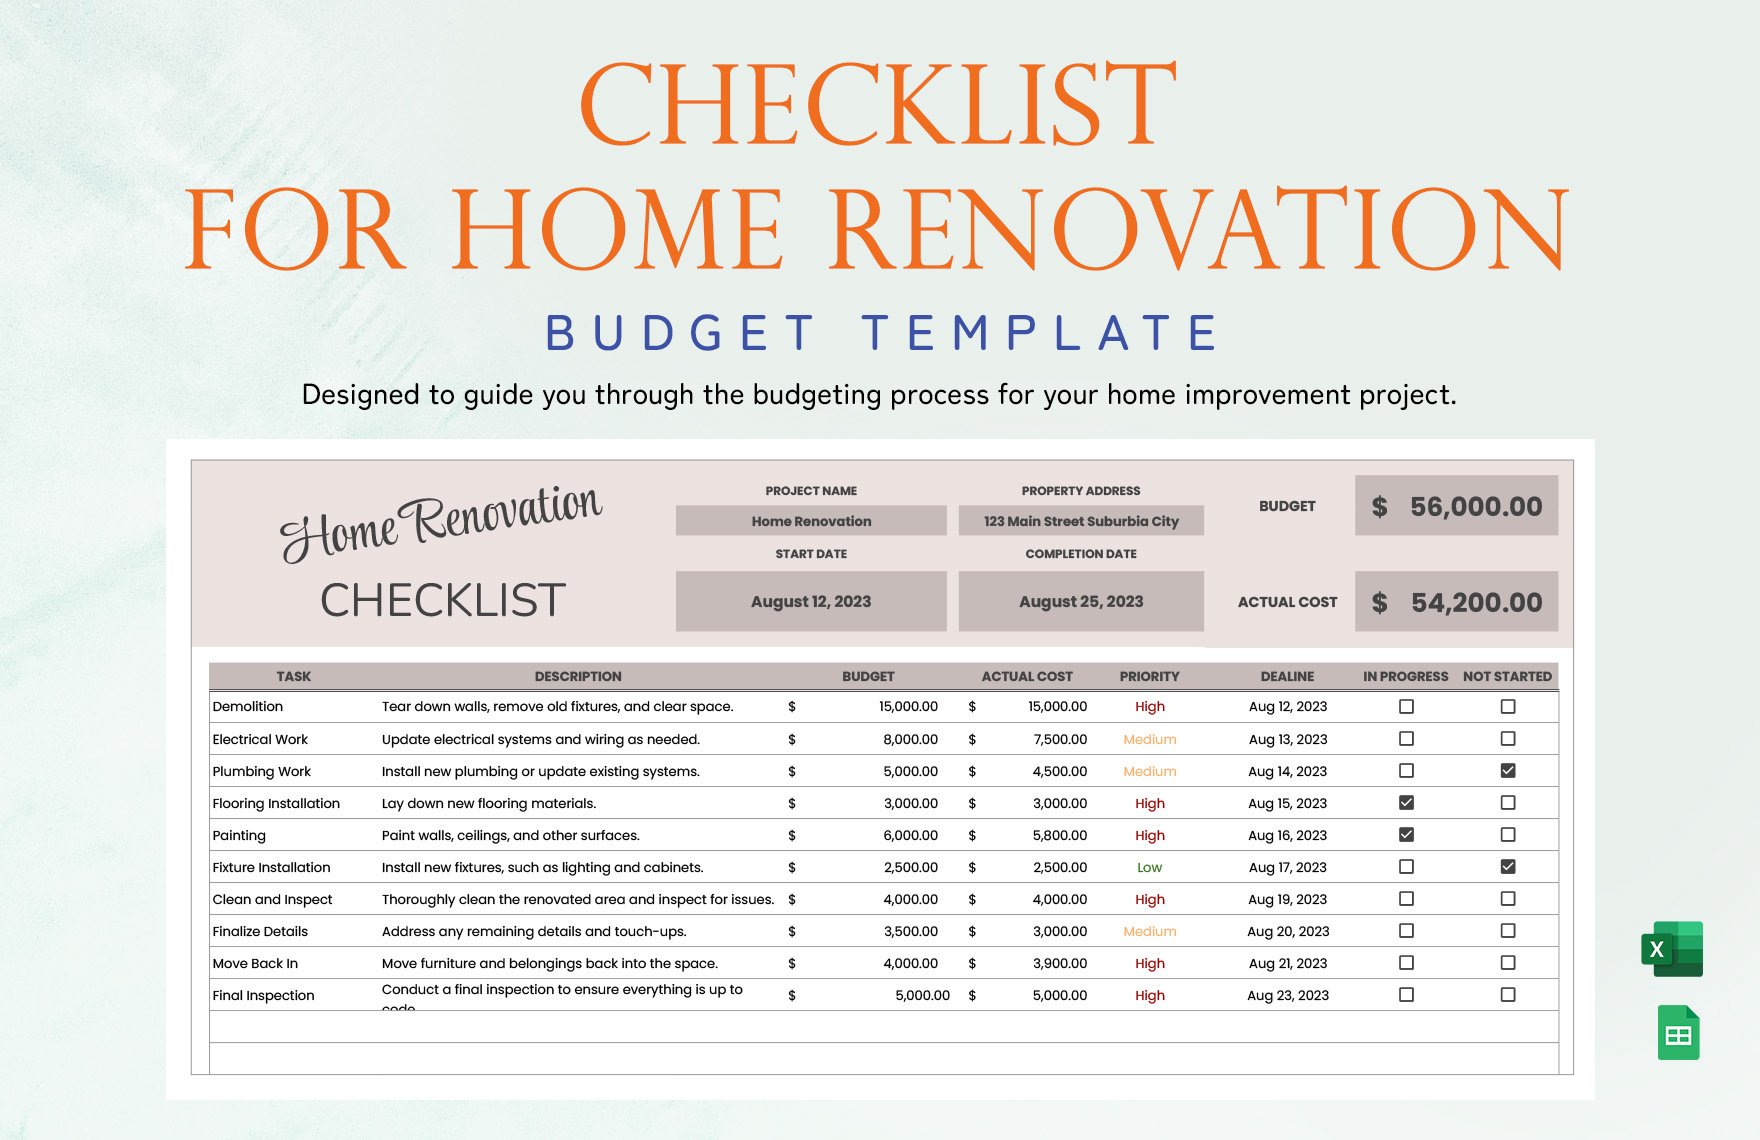 Free Checklist for Home Renovation Budget Template in Excel, Google Sheets